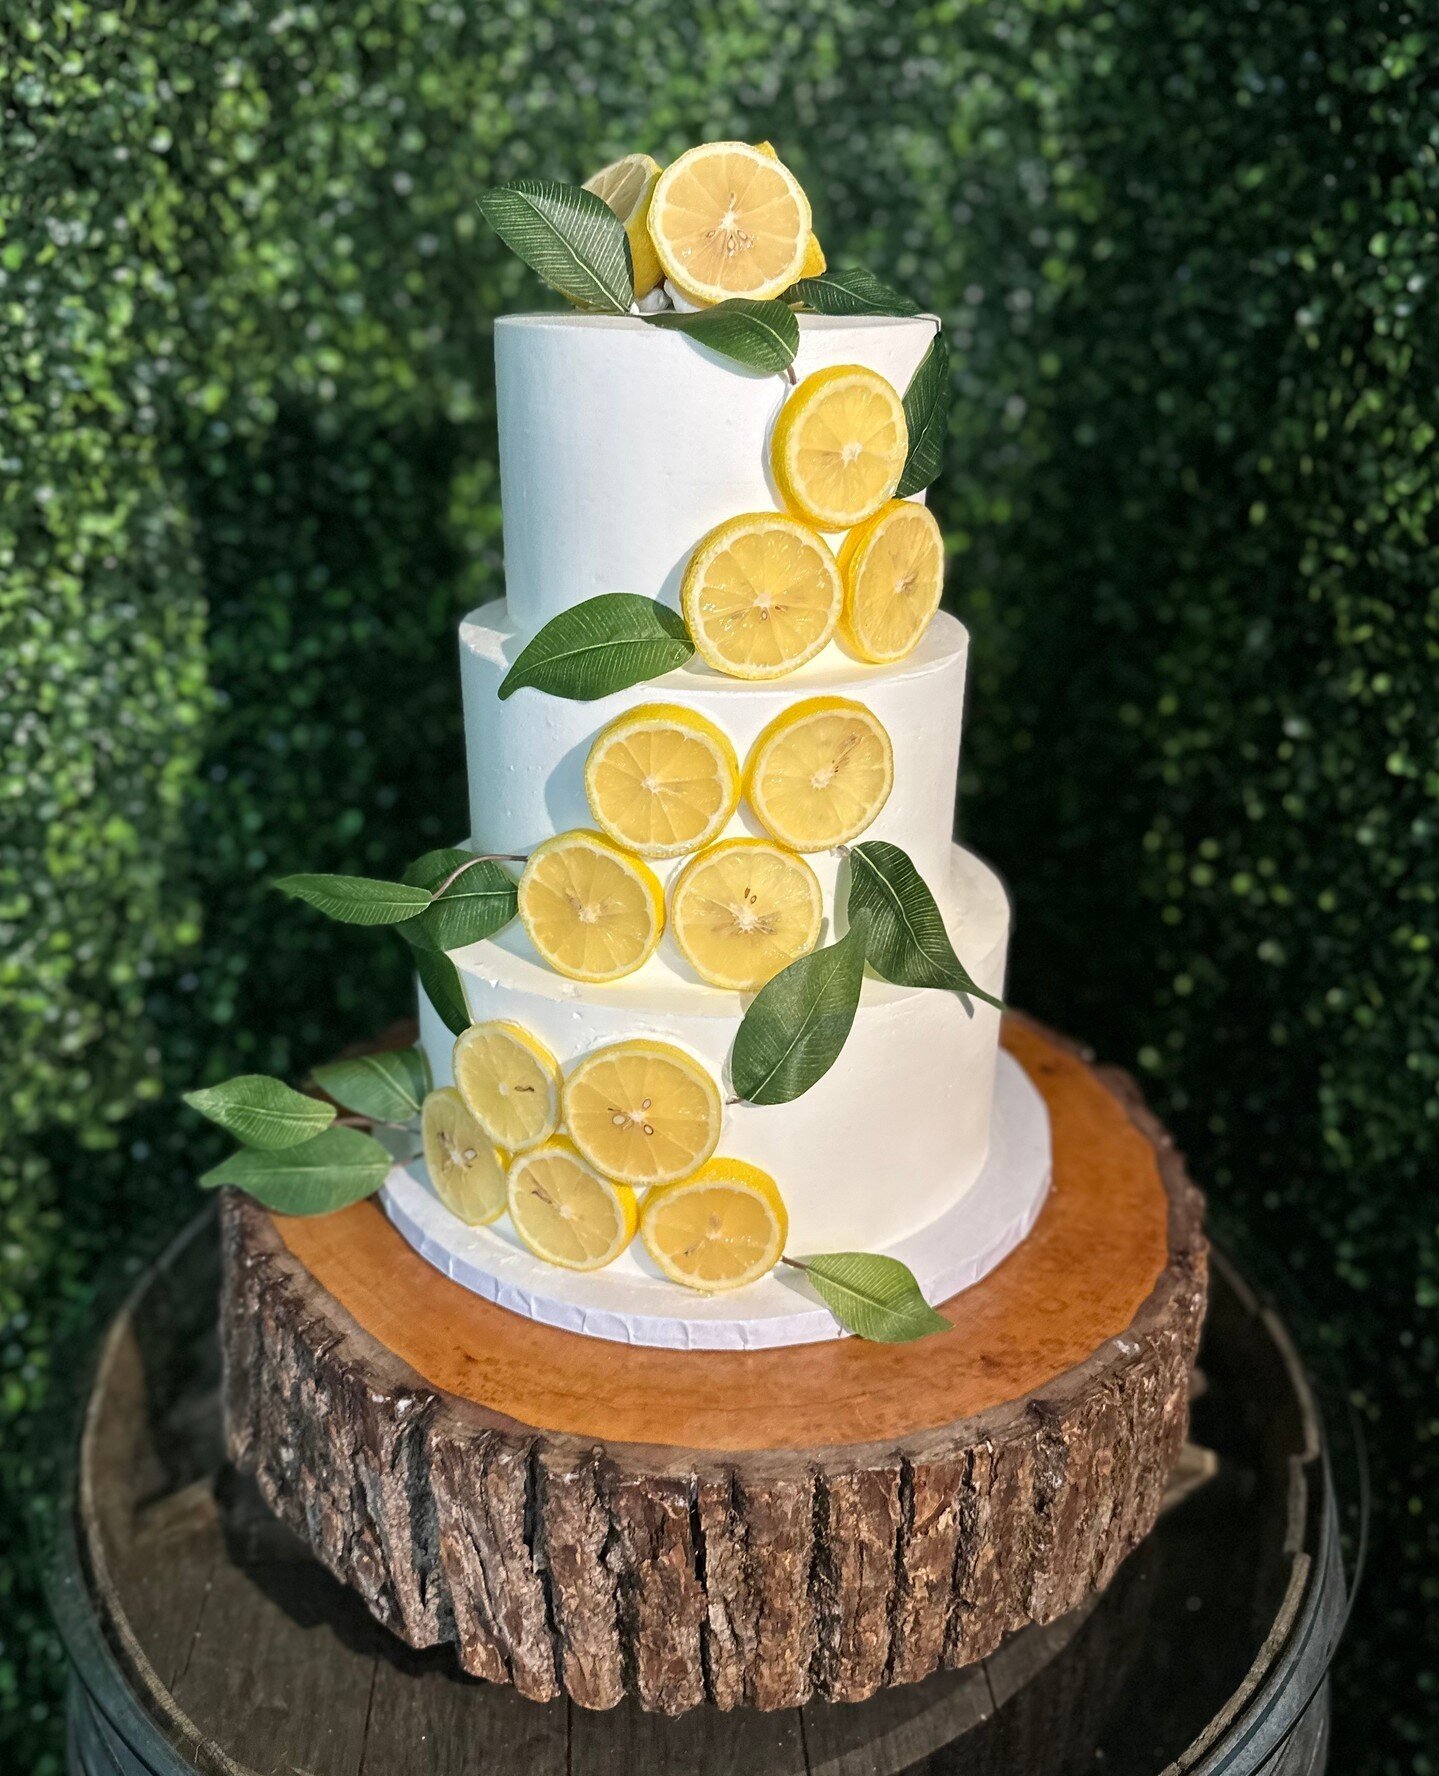 🍋 Lemon Slice wedding cake 🍋⁠
⁠
⁠
Have an upcoming wedding? Call us at⁠
(951) 699-2399 for a wedding consultation⁠
or visit our website at www.1914bakery.com for more info!⁠
⁠
#dessert #cakedesigner #flowers #temeculawine #chocolate #food #customca